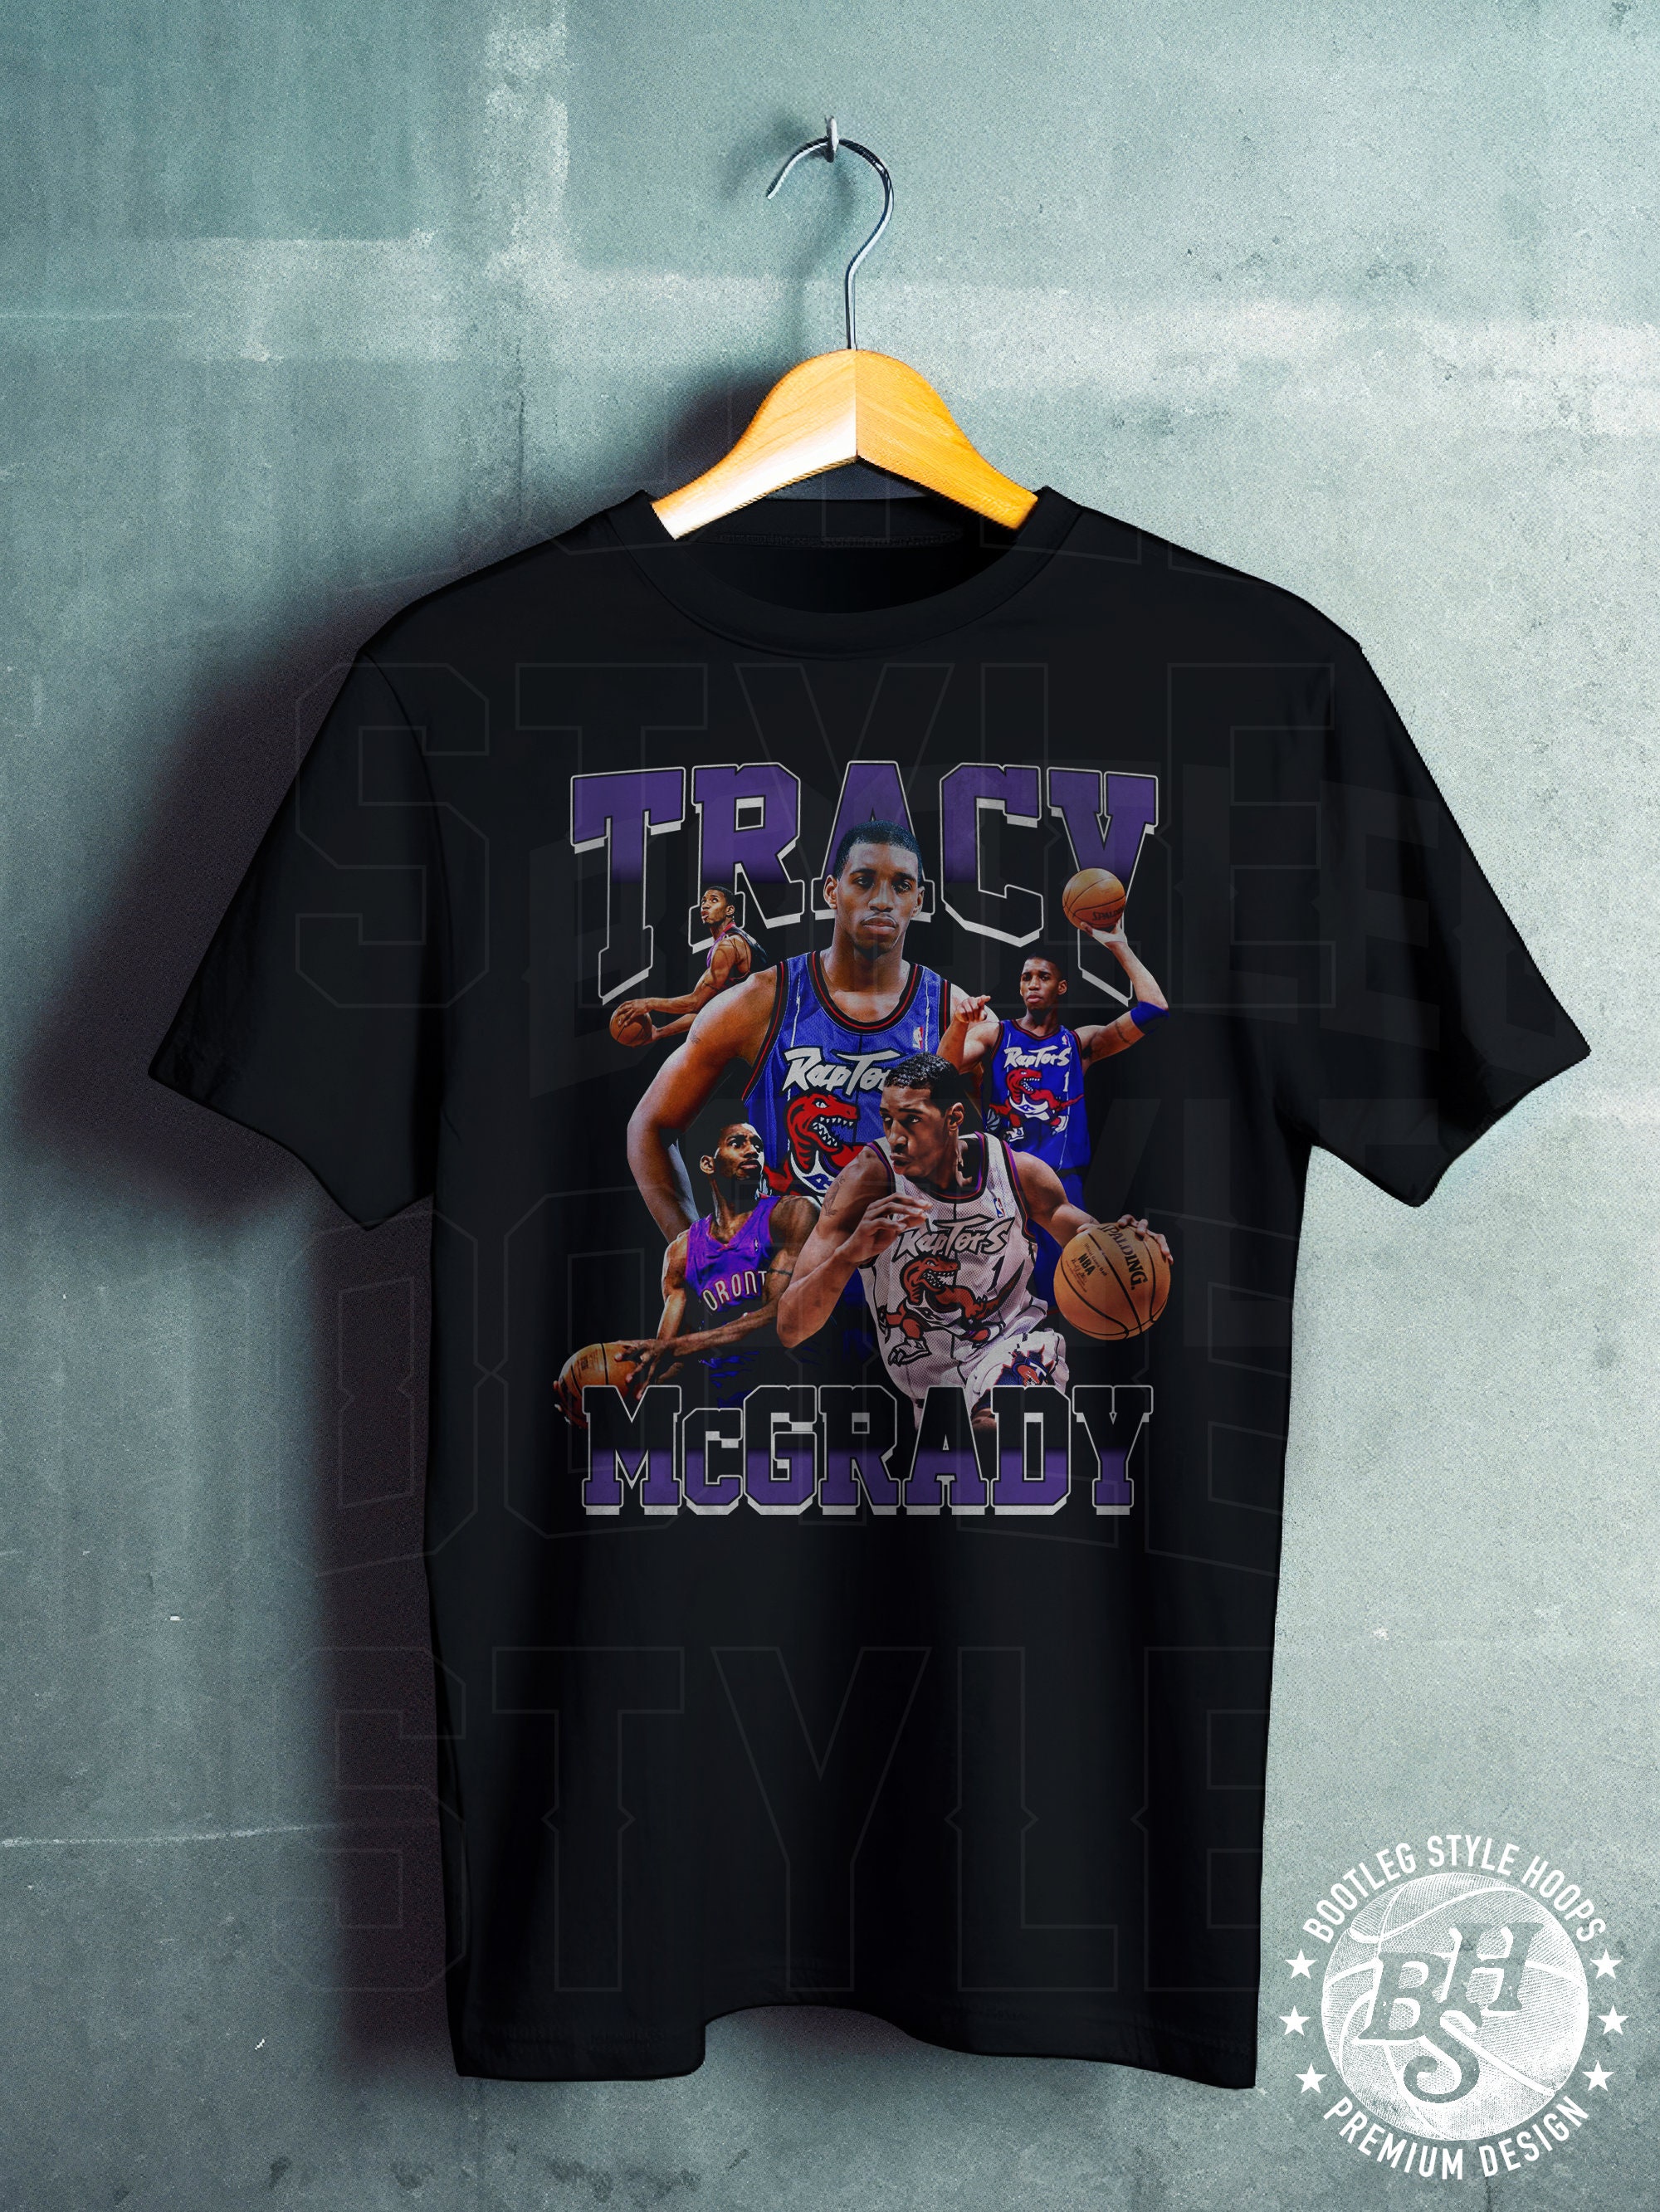 tracy mcgrady outfits